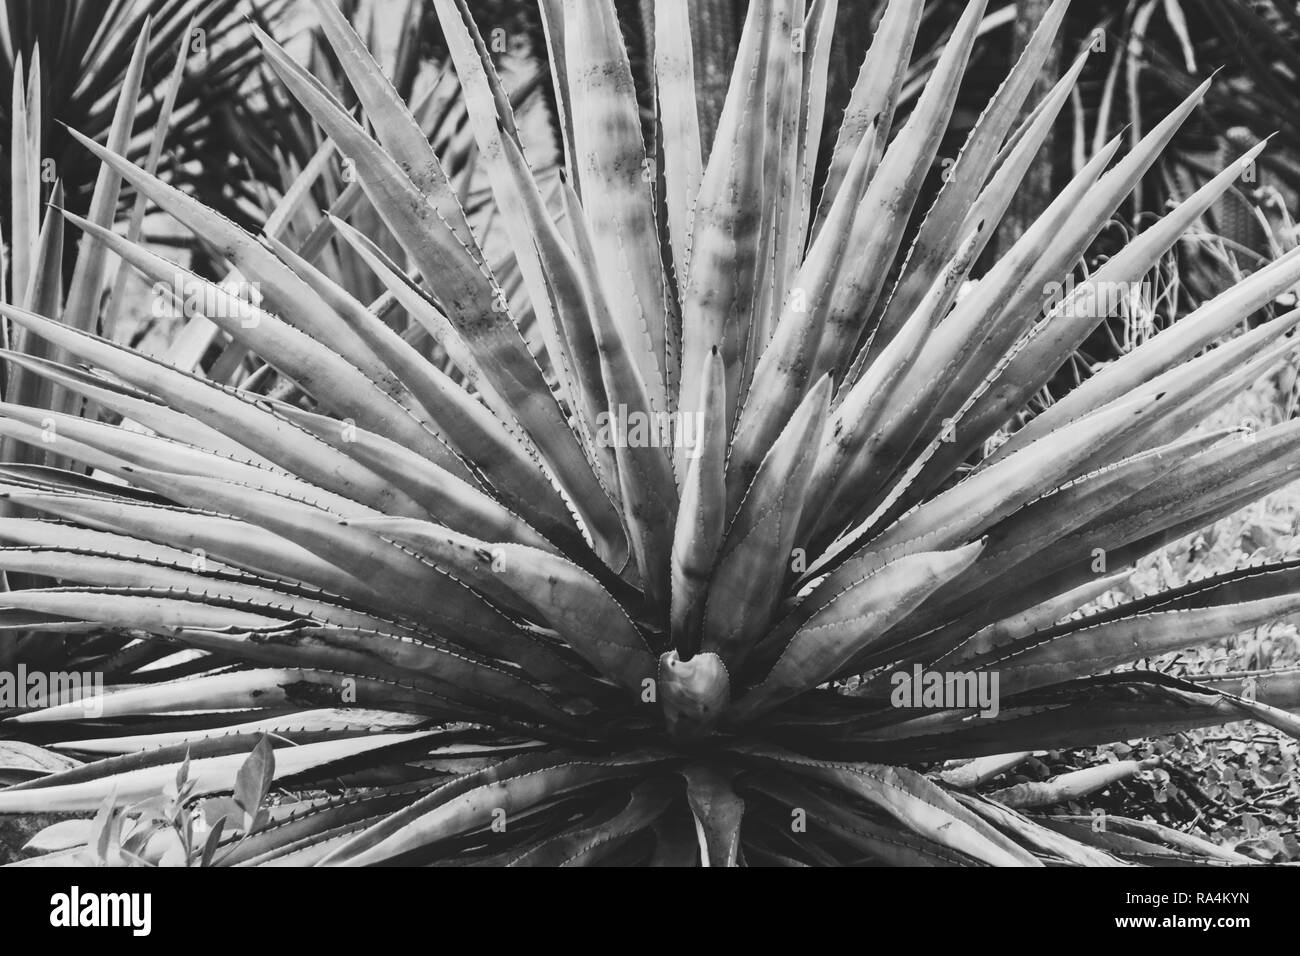 Detail of some maguey plants Stock Photo